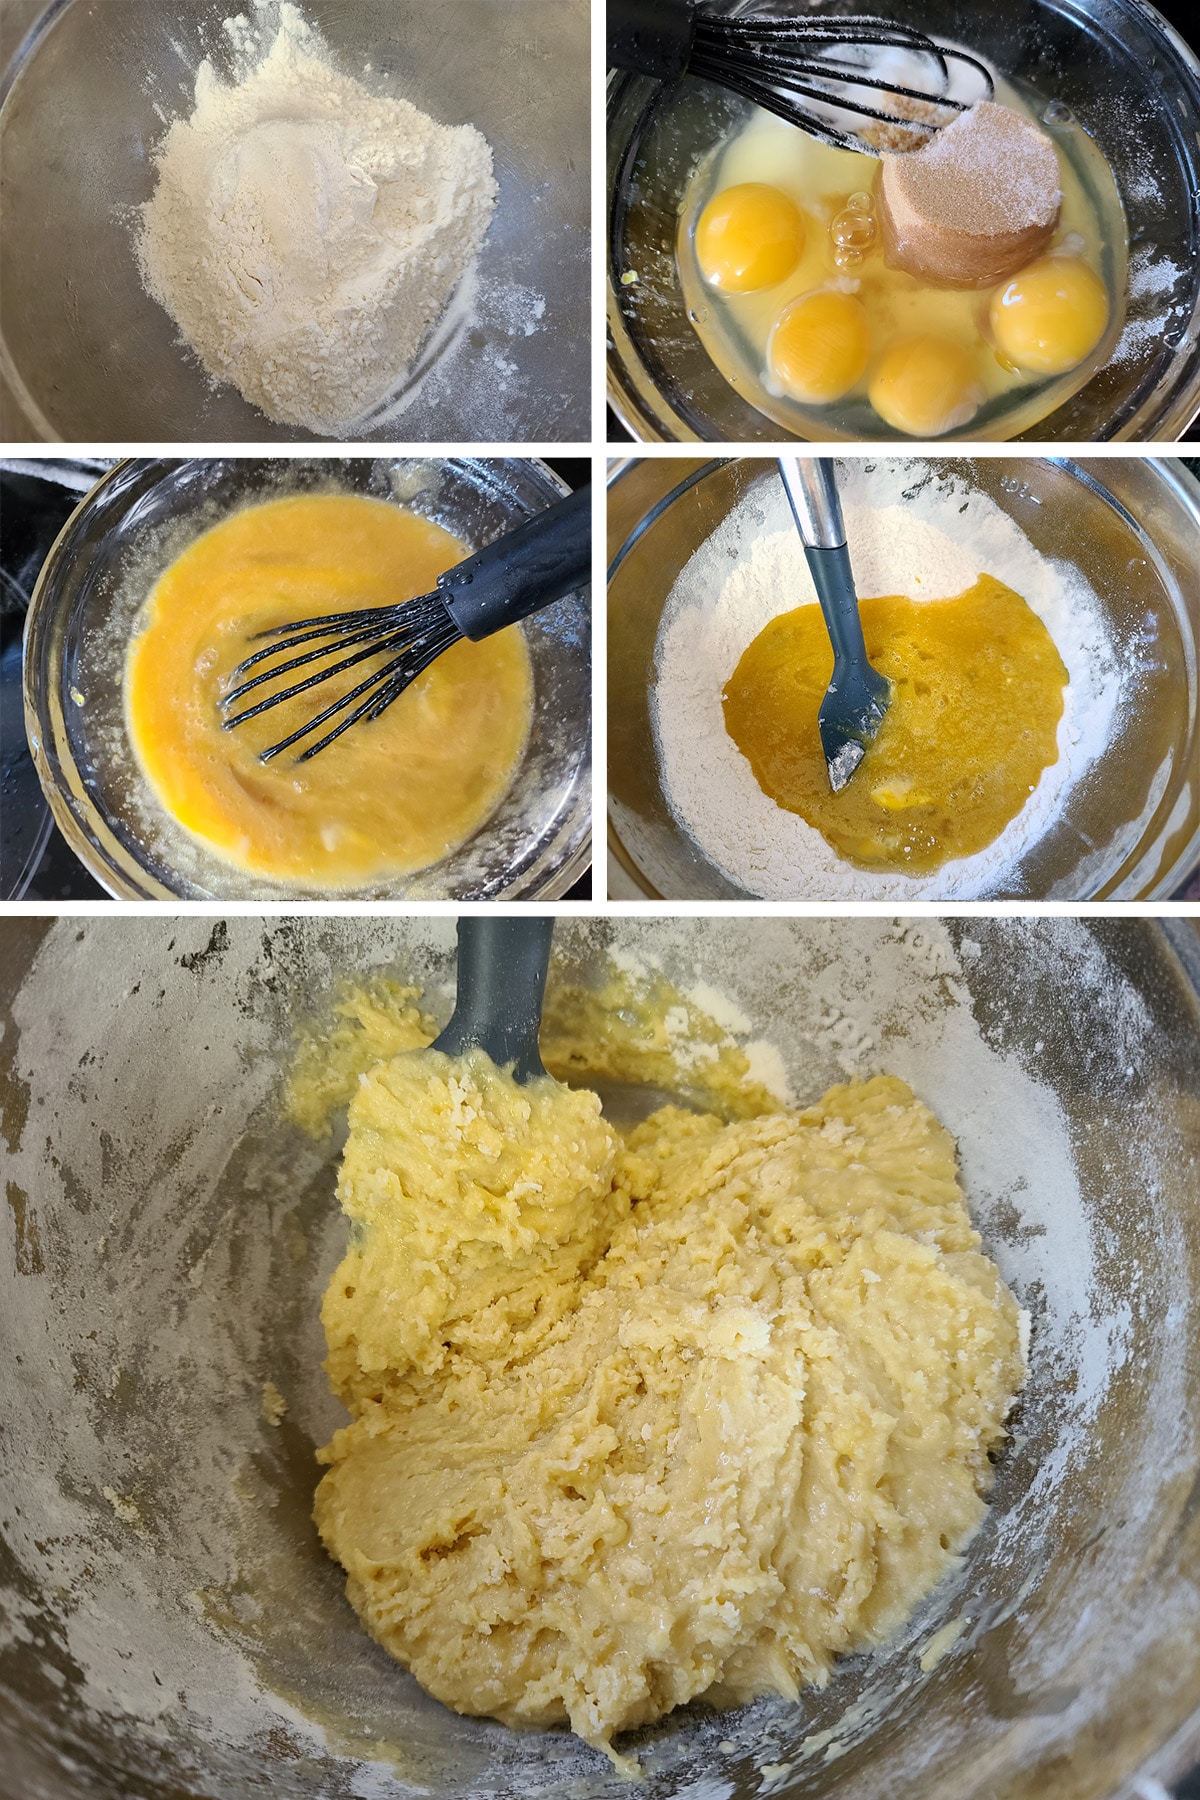 A five part image showing the batter being mixed together, as described.